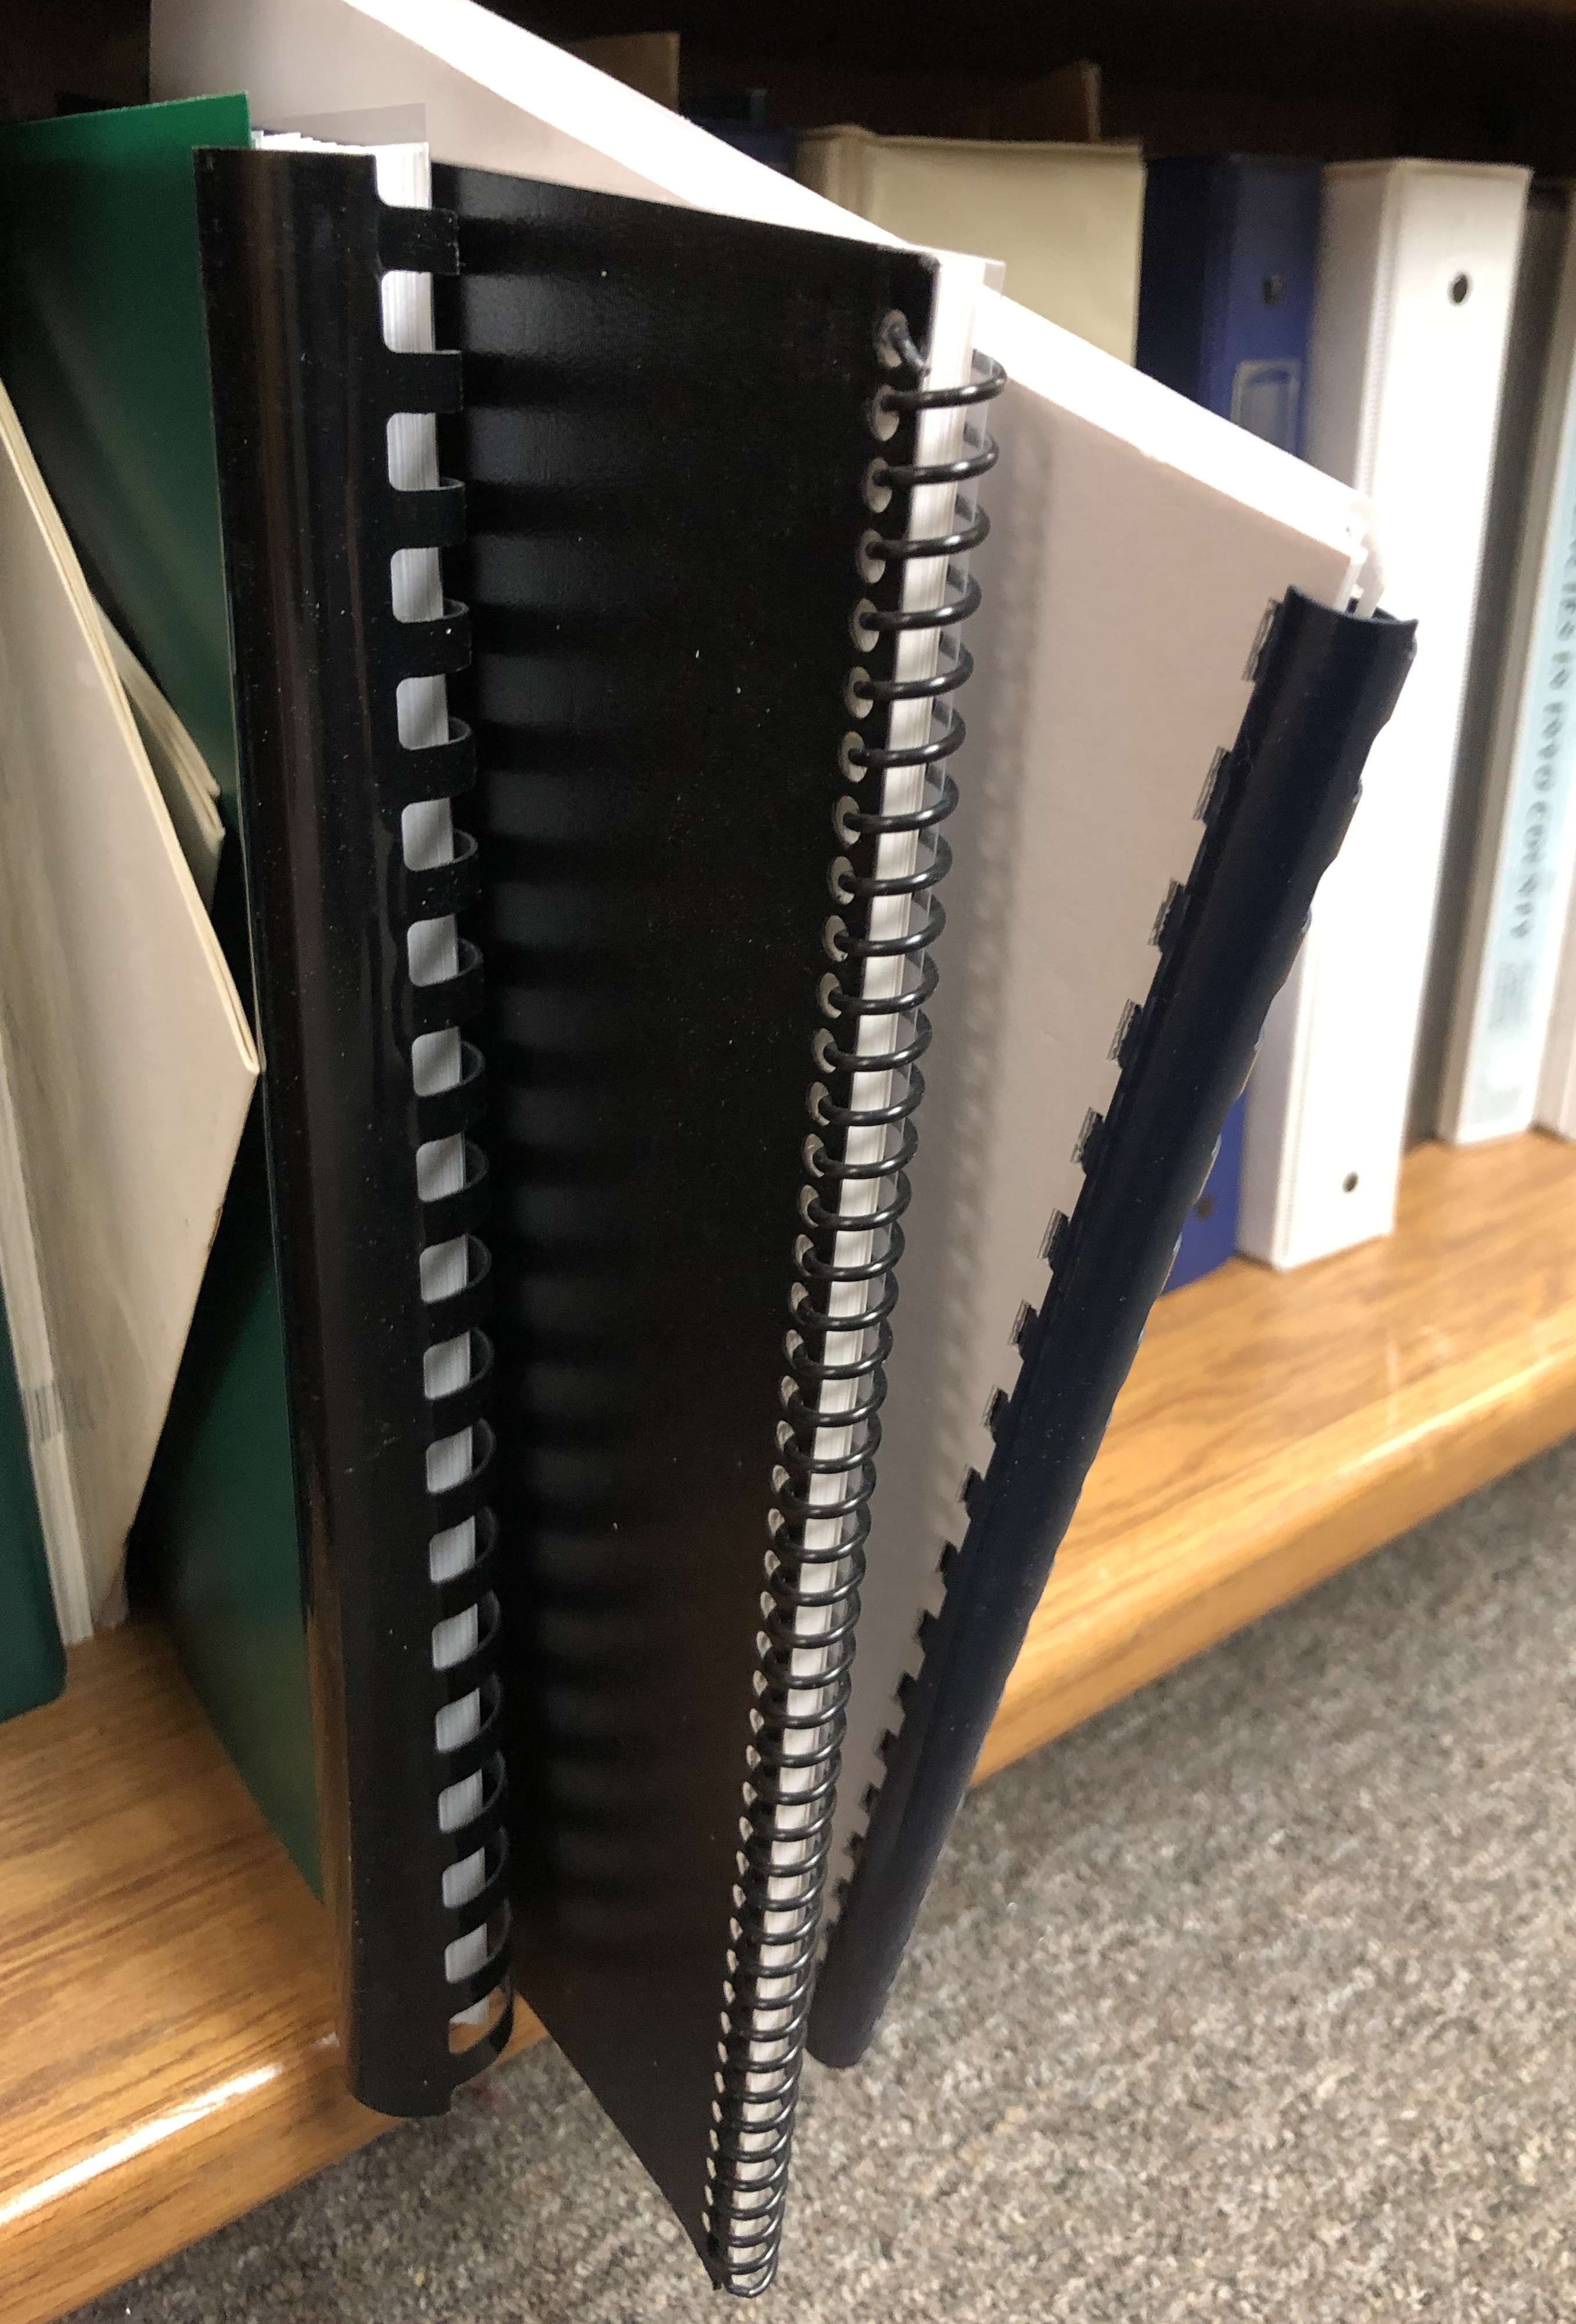 Multi-sized spiral-bound reports sticking out from bottom level of book shelf.